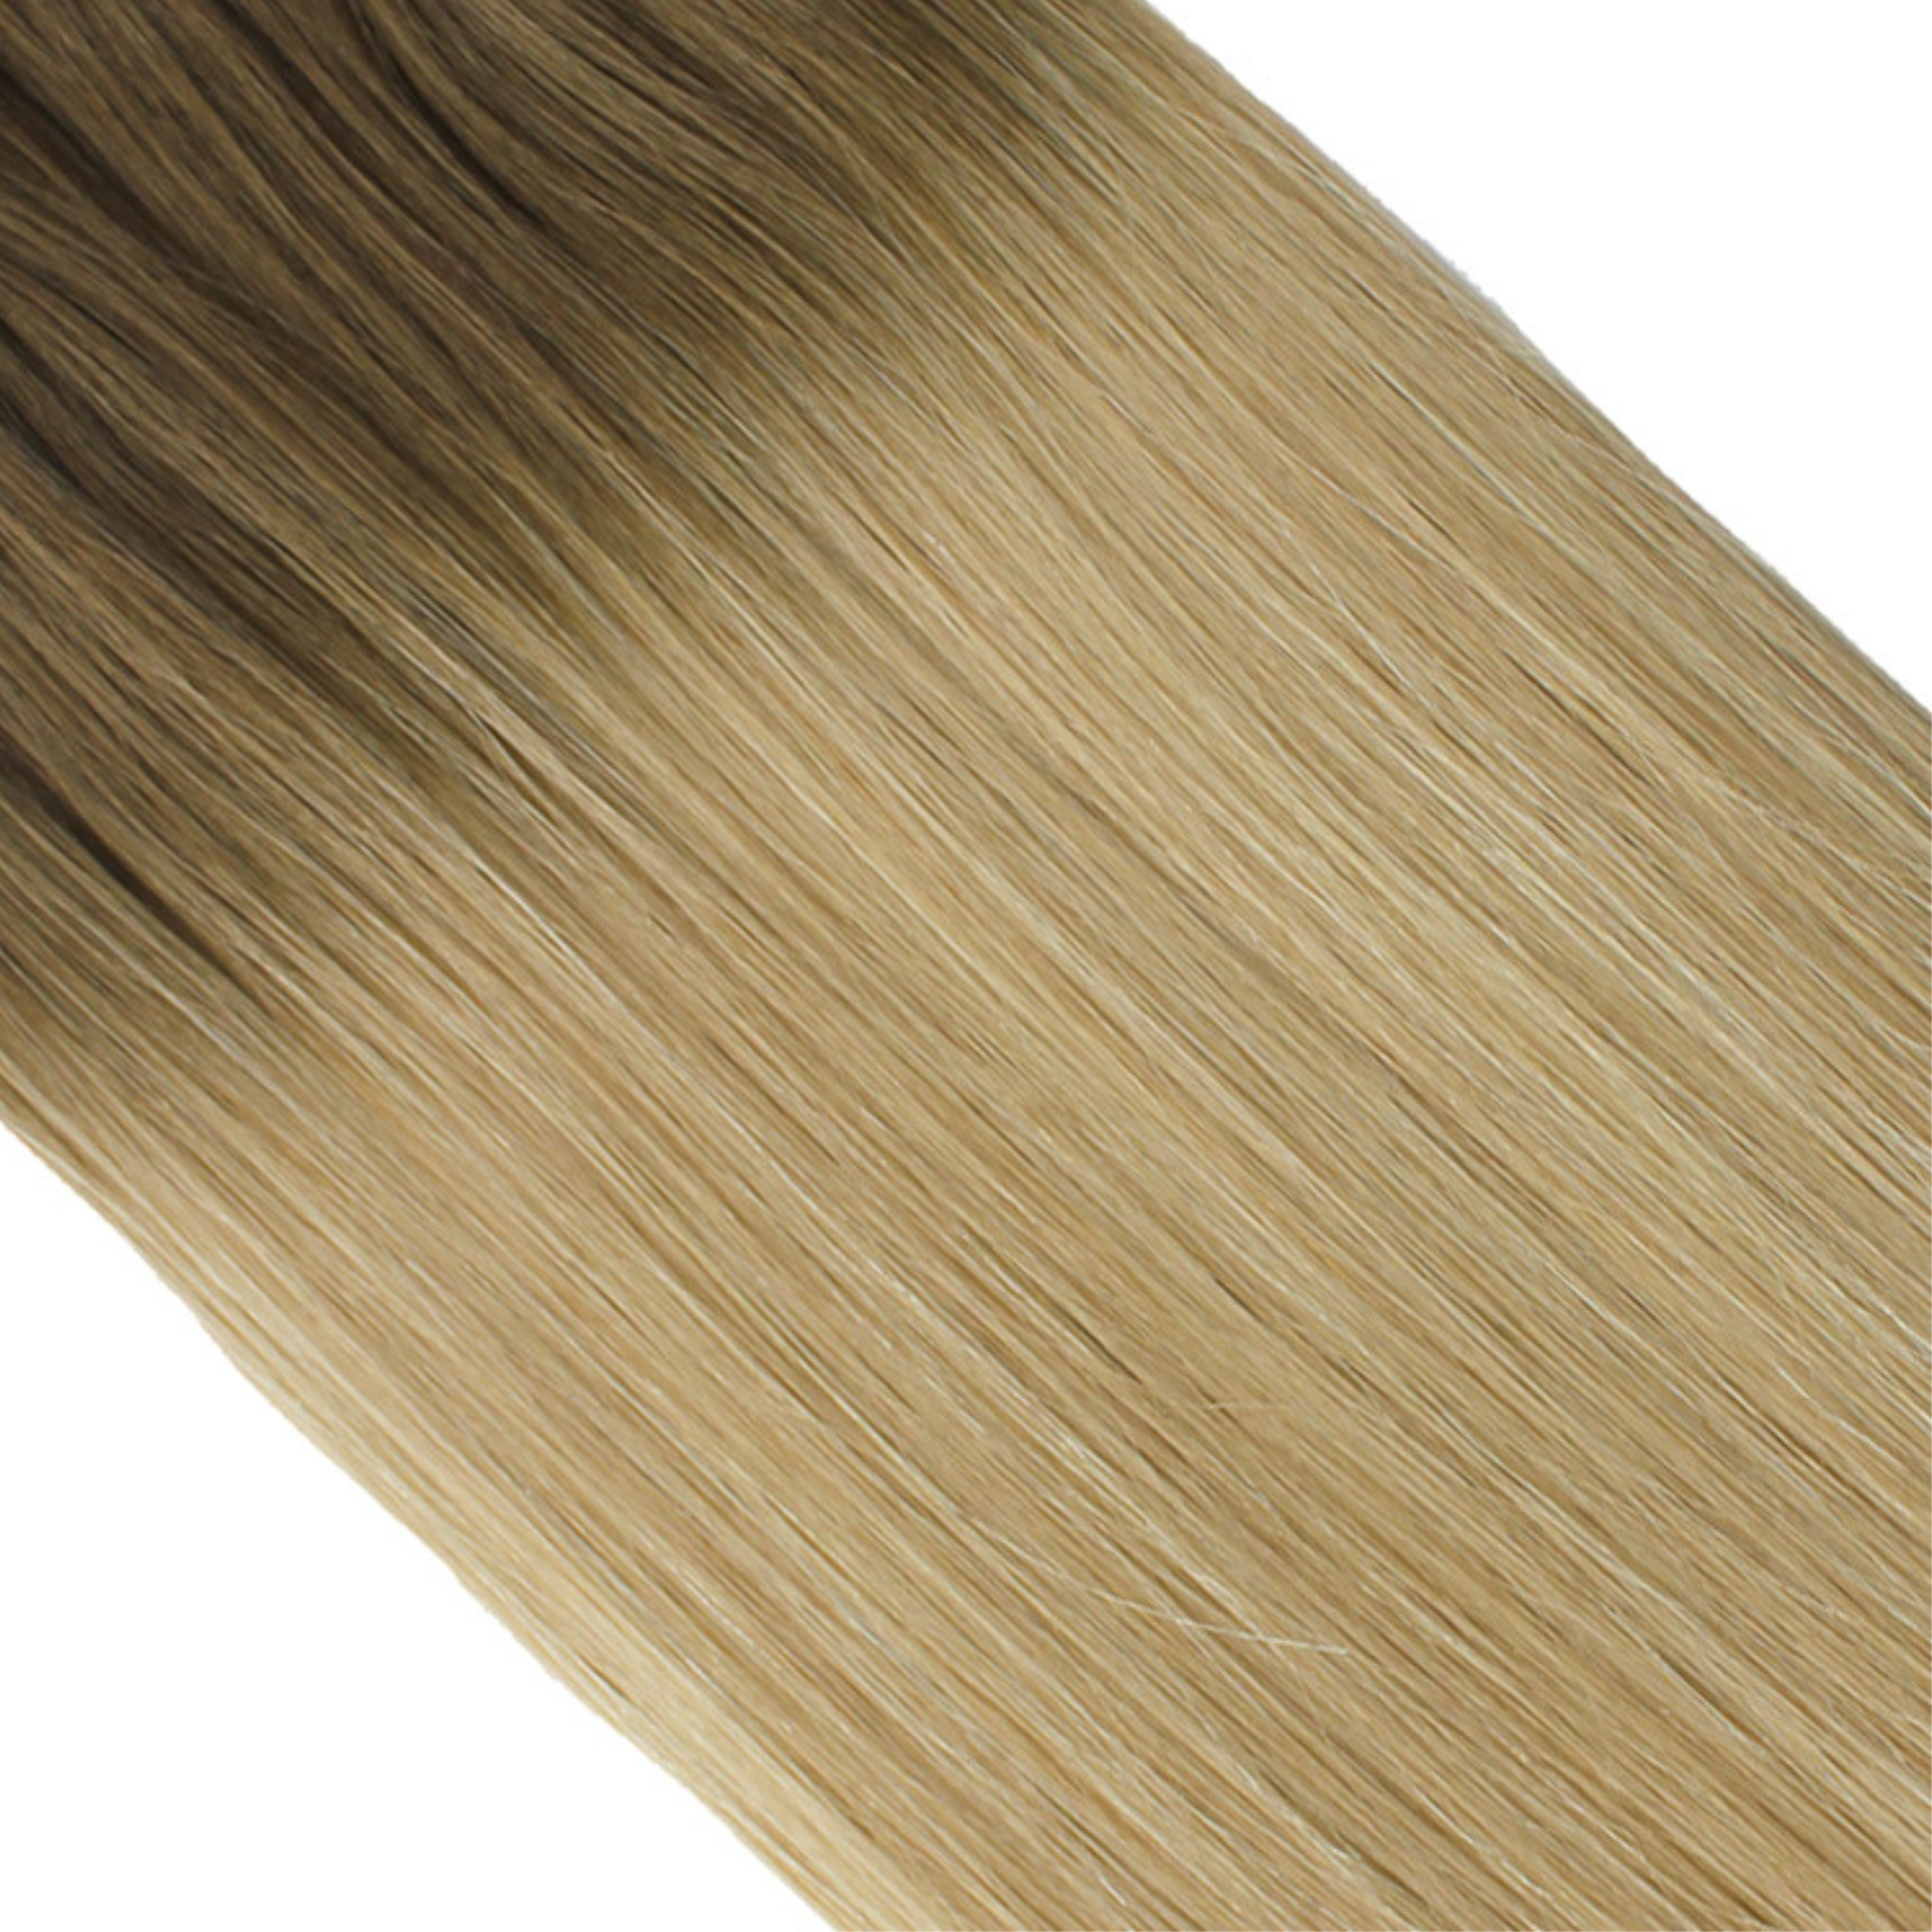 "hair rehab london 22" weft hair extensions shade swatch titled rooted dirty blonde"